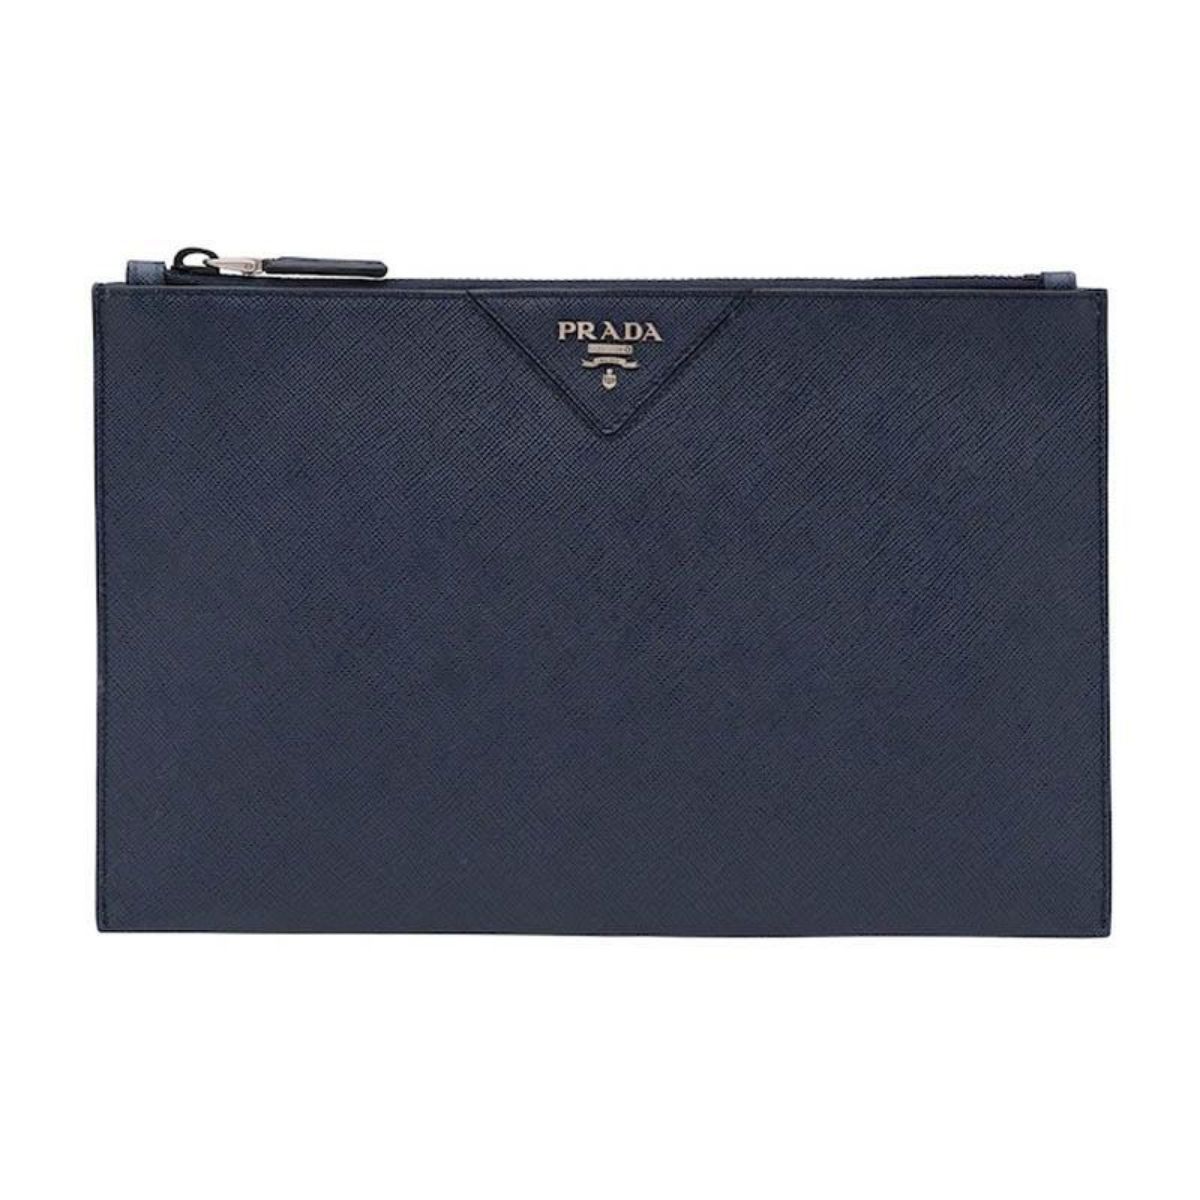 Prada Blue Saffiano Leather Briefcase Clutch 2NG05V at_Queen_Bee_of_Beverly_Hills